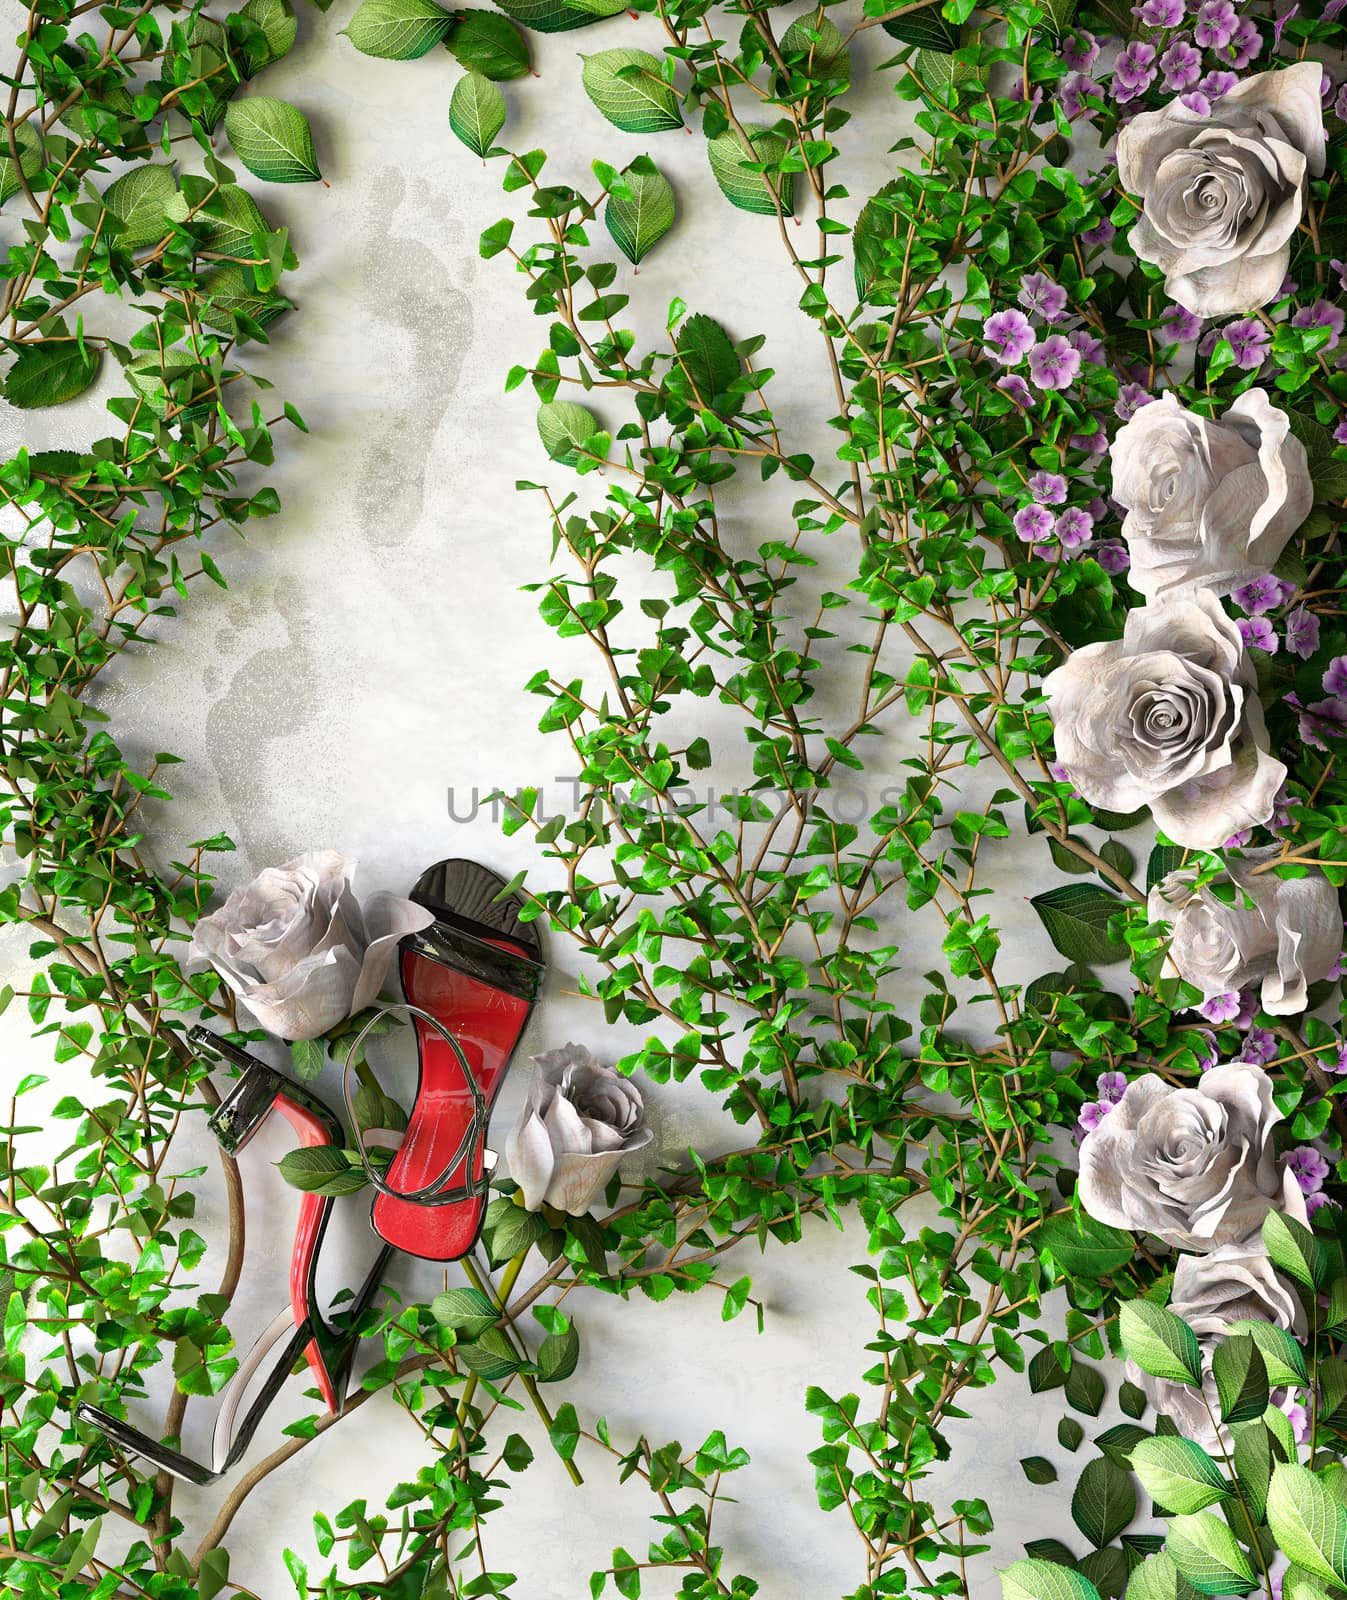 flowers and plants holiday sale concept background with shoes by denisgo